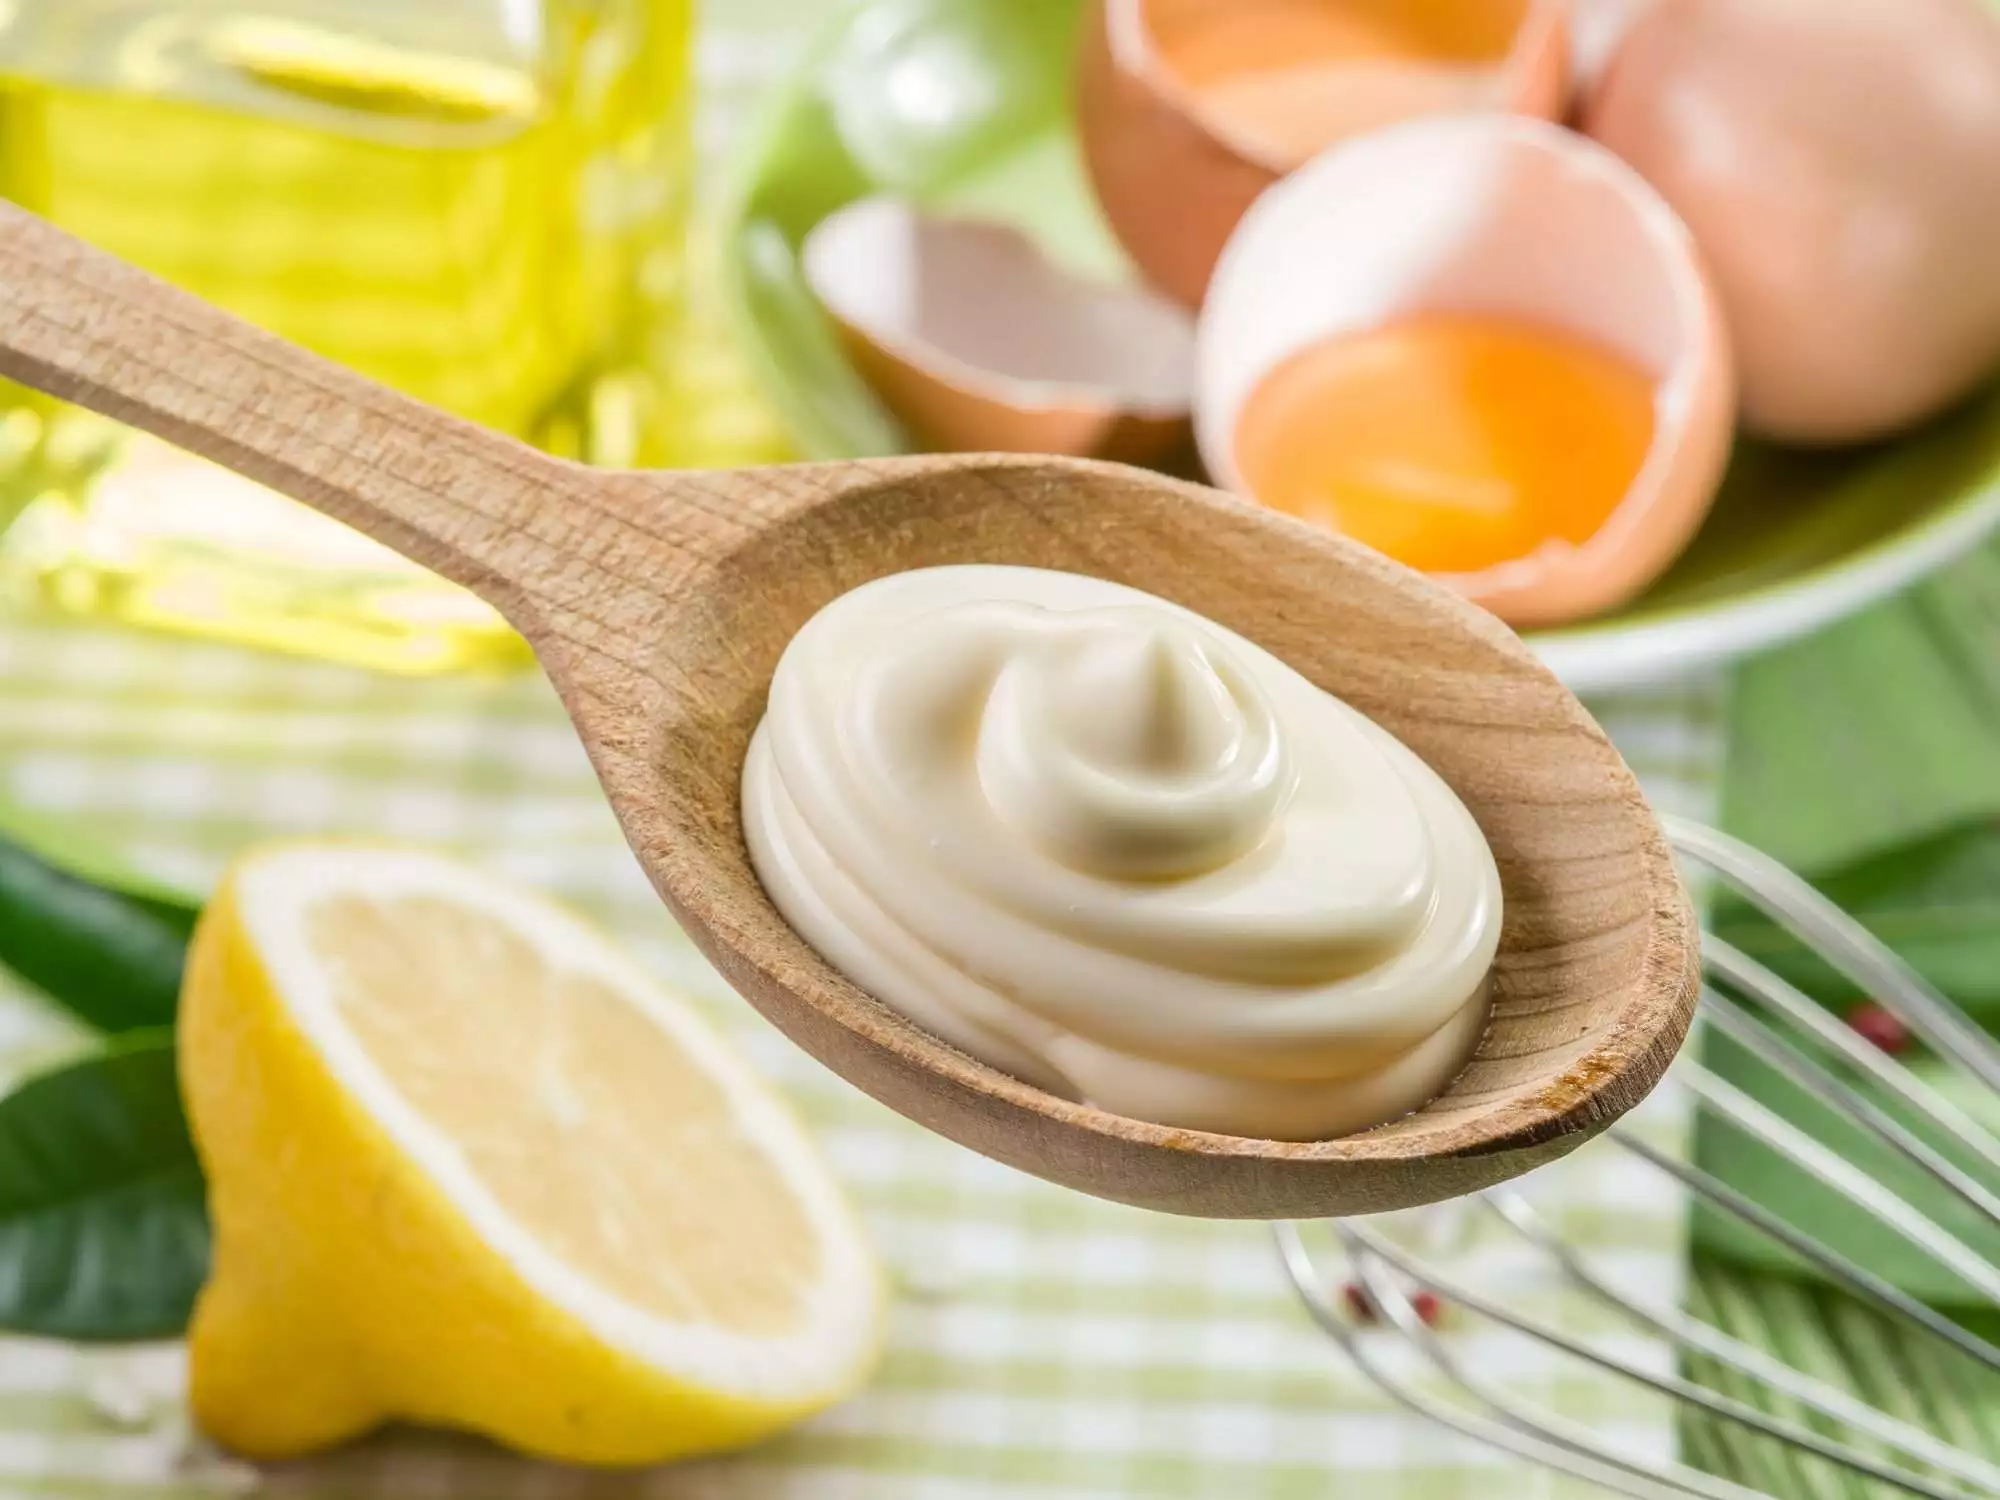 Natural mayonnaise sauce in the wooden spoon and its ingredient on the background.